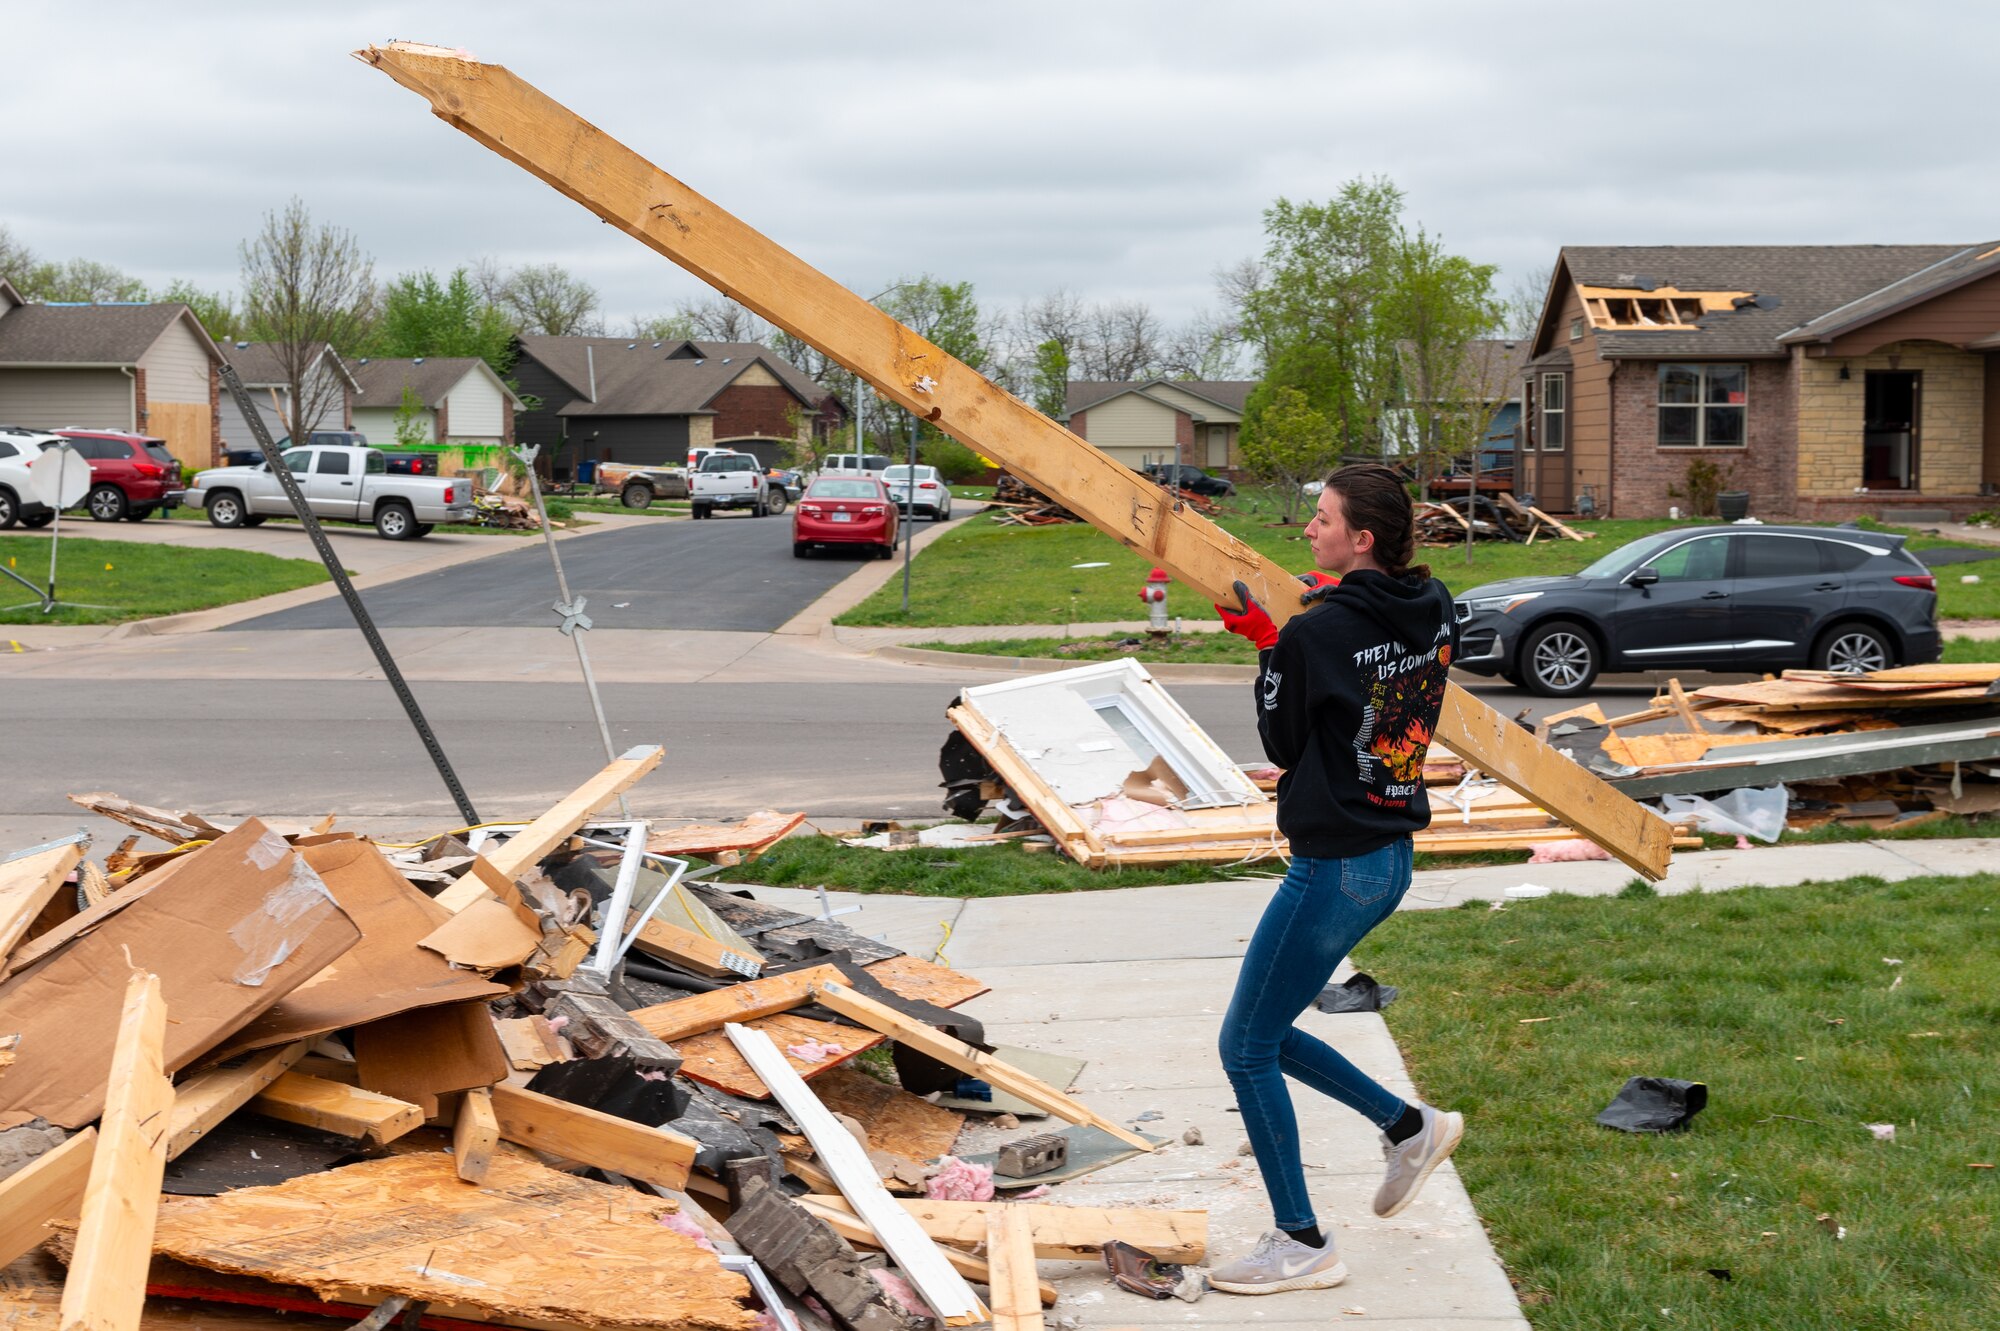 Airman Rebecca Ellison, 22nd Operational Medical Readiness Squadron dental technician, cleans up debris left by a tornado May 3, 2022, in Andover, Kansas.